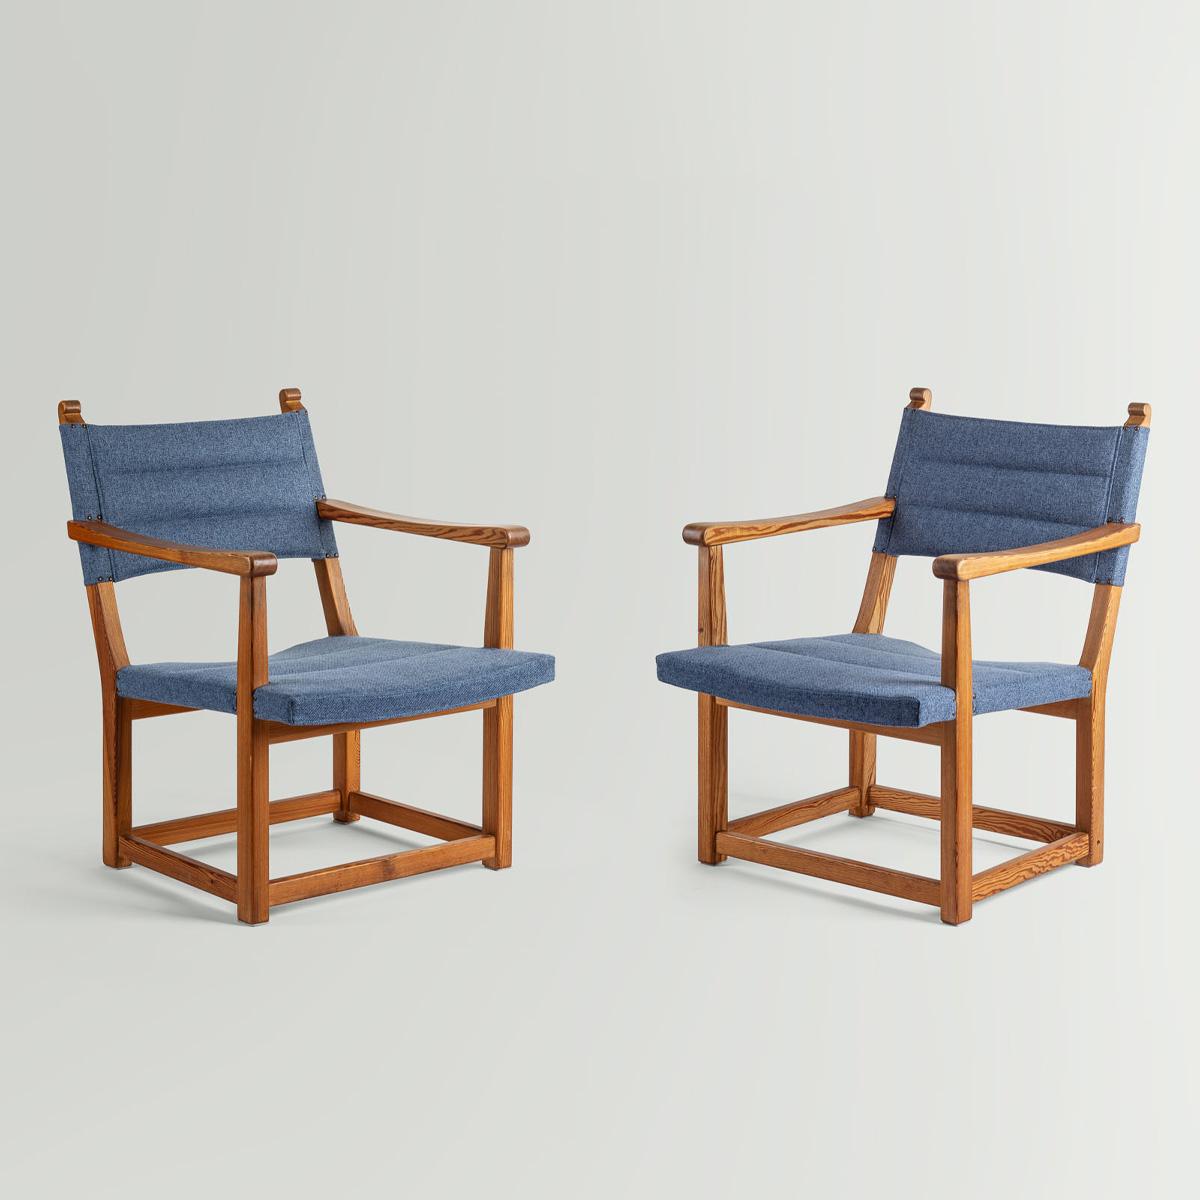 Pair of rare and elegant “Hängsits” armchairs in solid pine and blue fabric, designed by Carl Malmsten in Sweden, 1947.

Belonging among the rarer models of Carl Malmsten, these armchairs from the late 1940s feature unique block-shaped solid pine